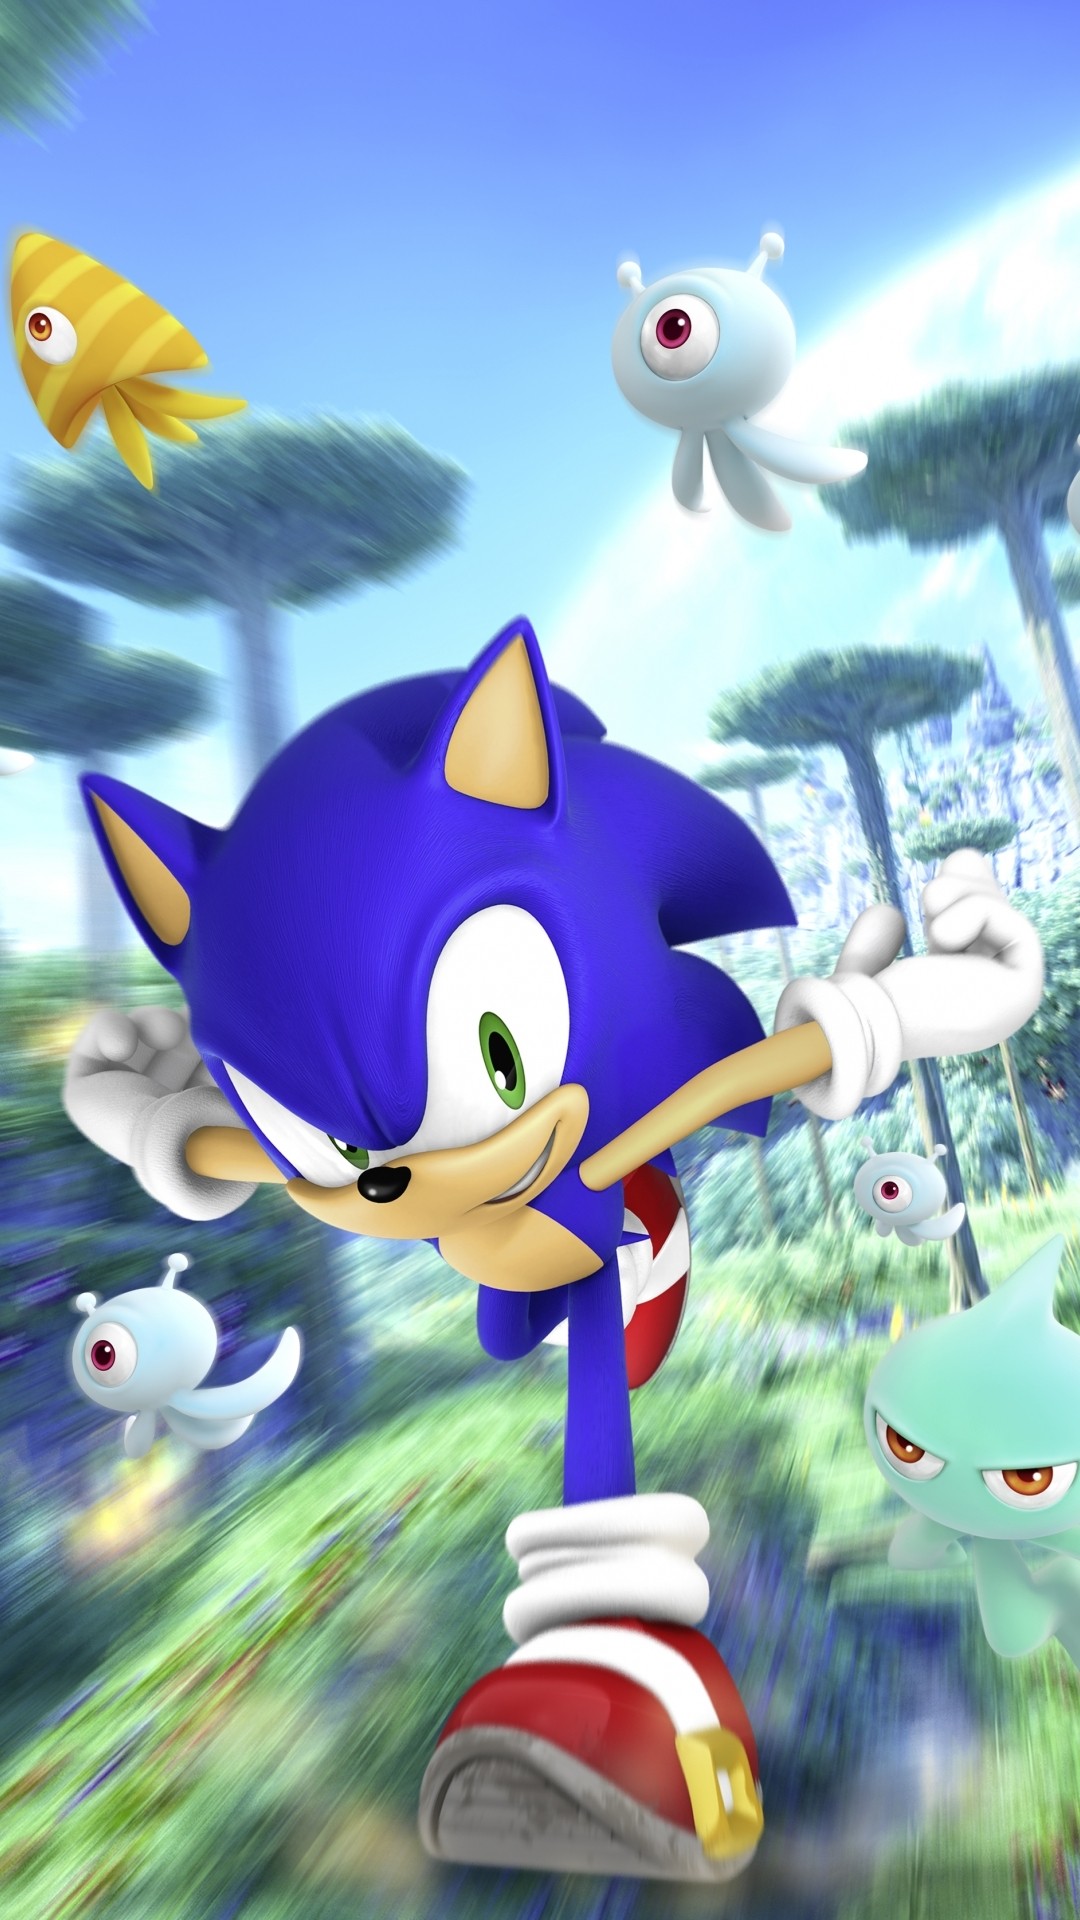 Sonic The Hedgehog free wallpaper for android